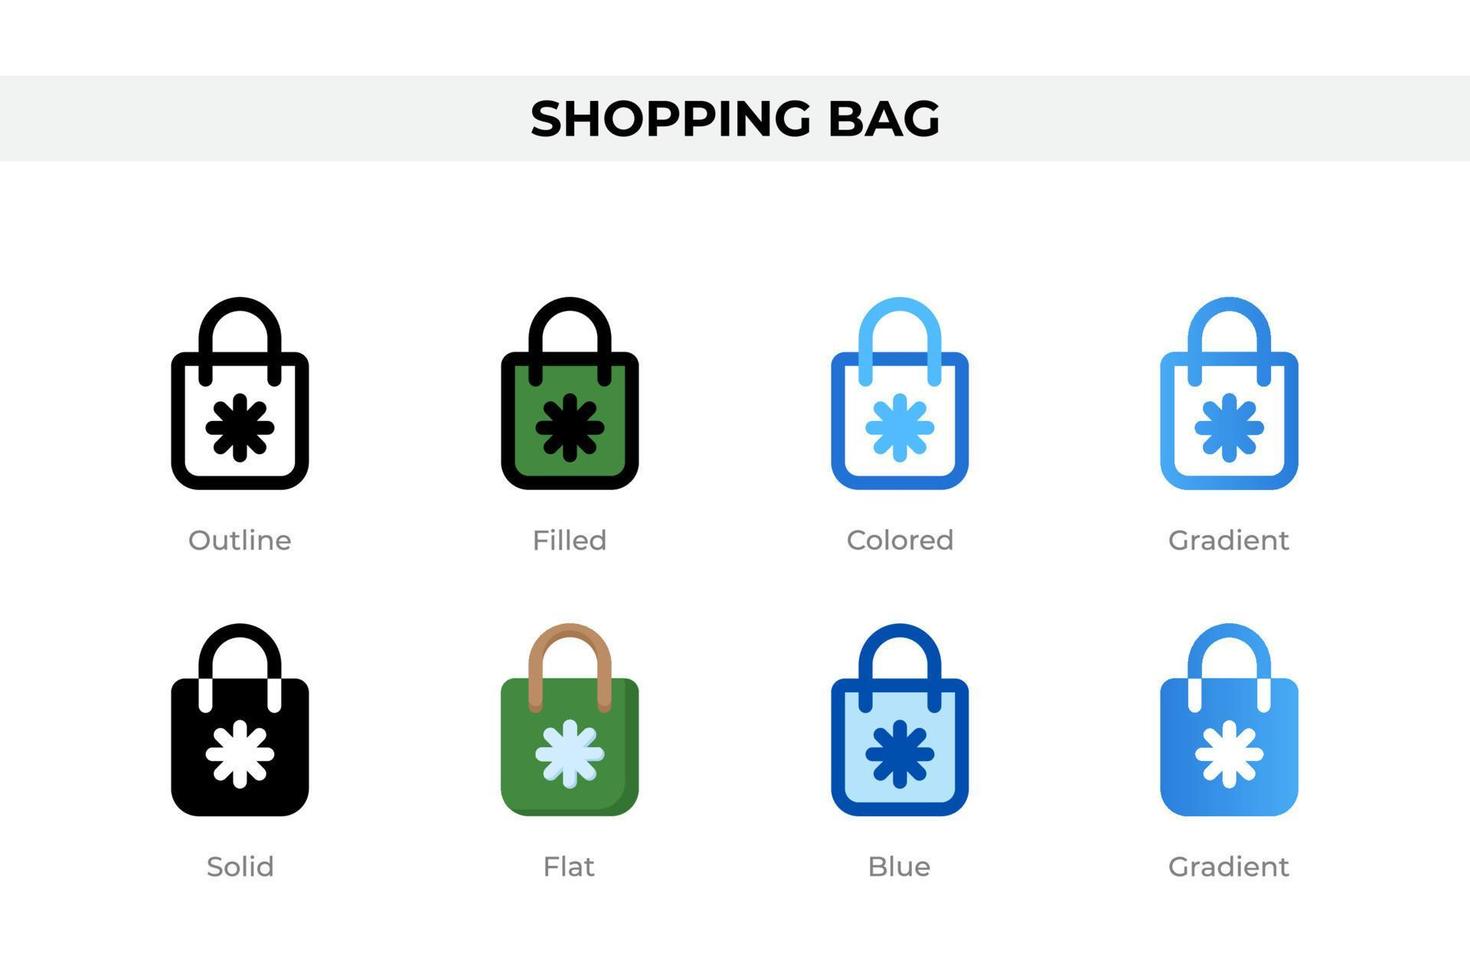 Shopping bag icons in different style. Shopping bag icons set. Holiday symbol. Different style icons set. Vector illustration